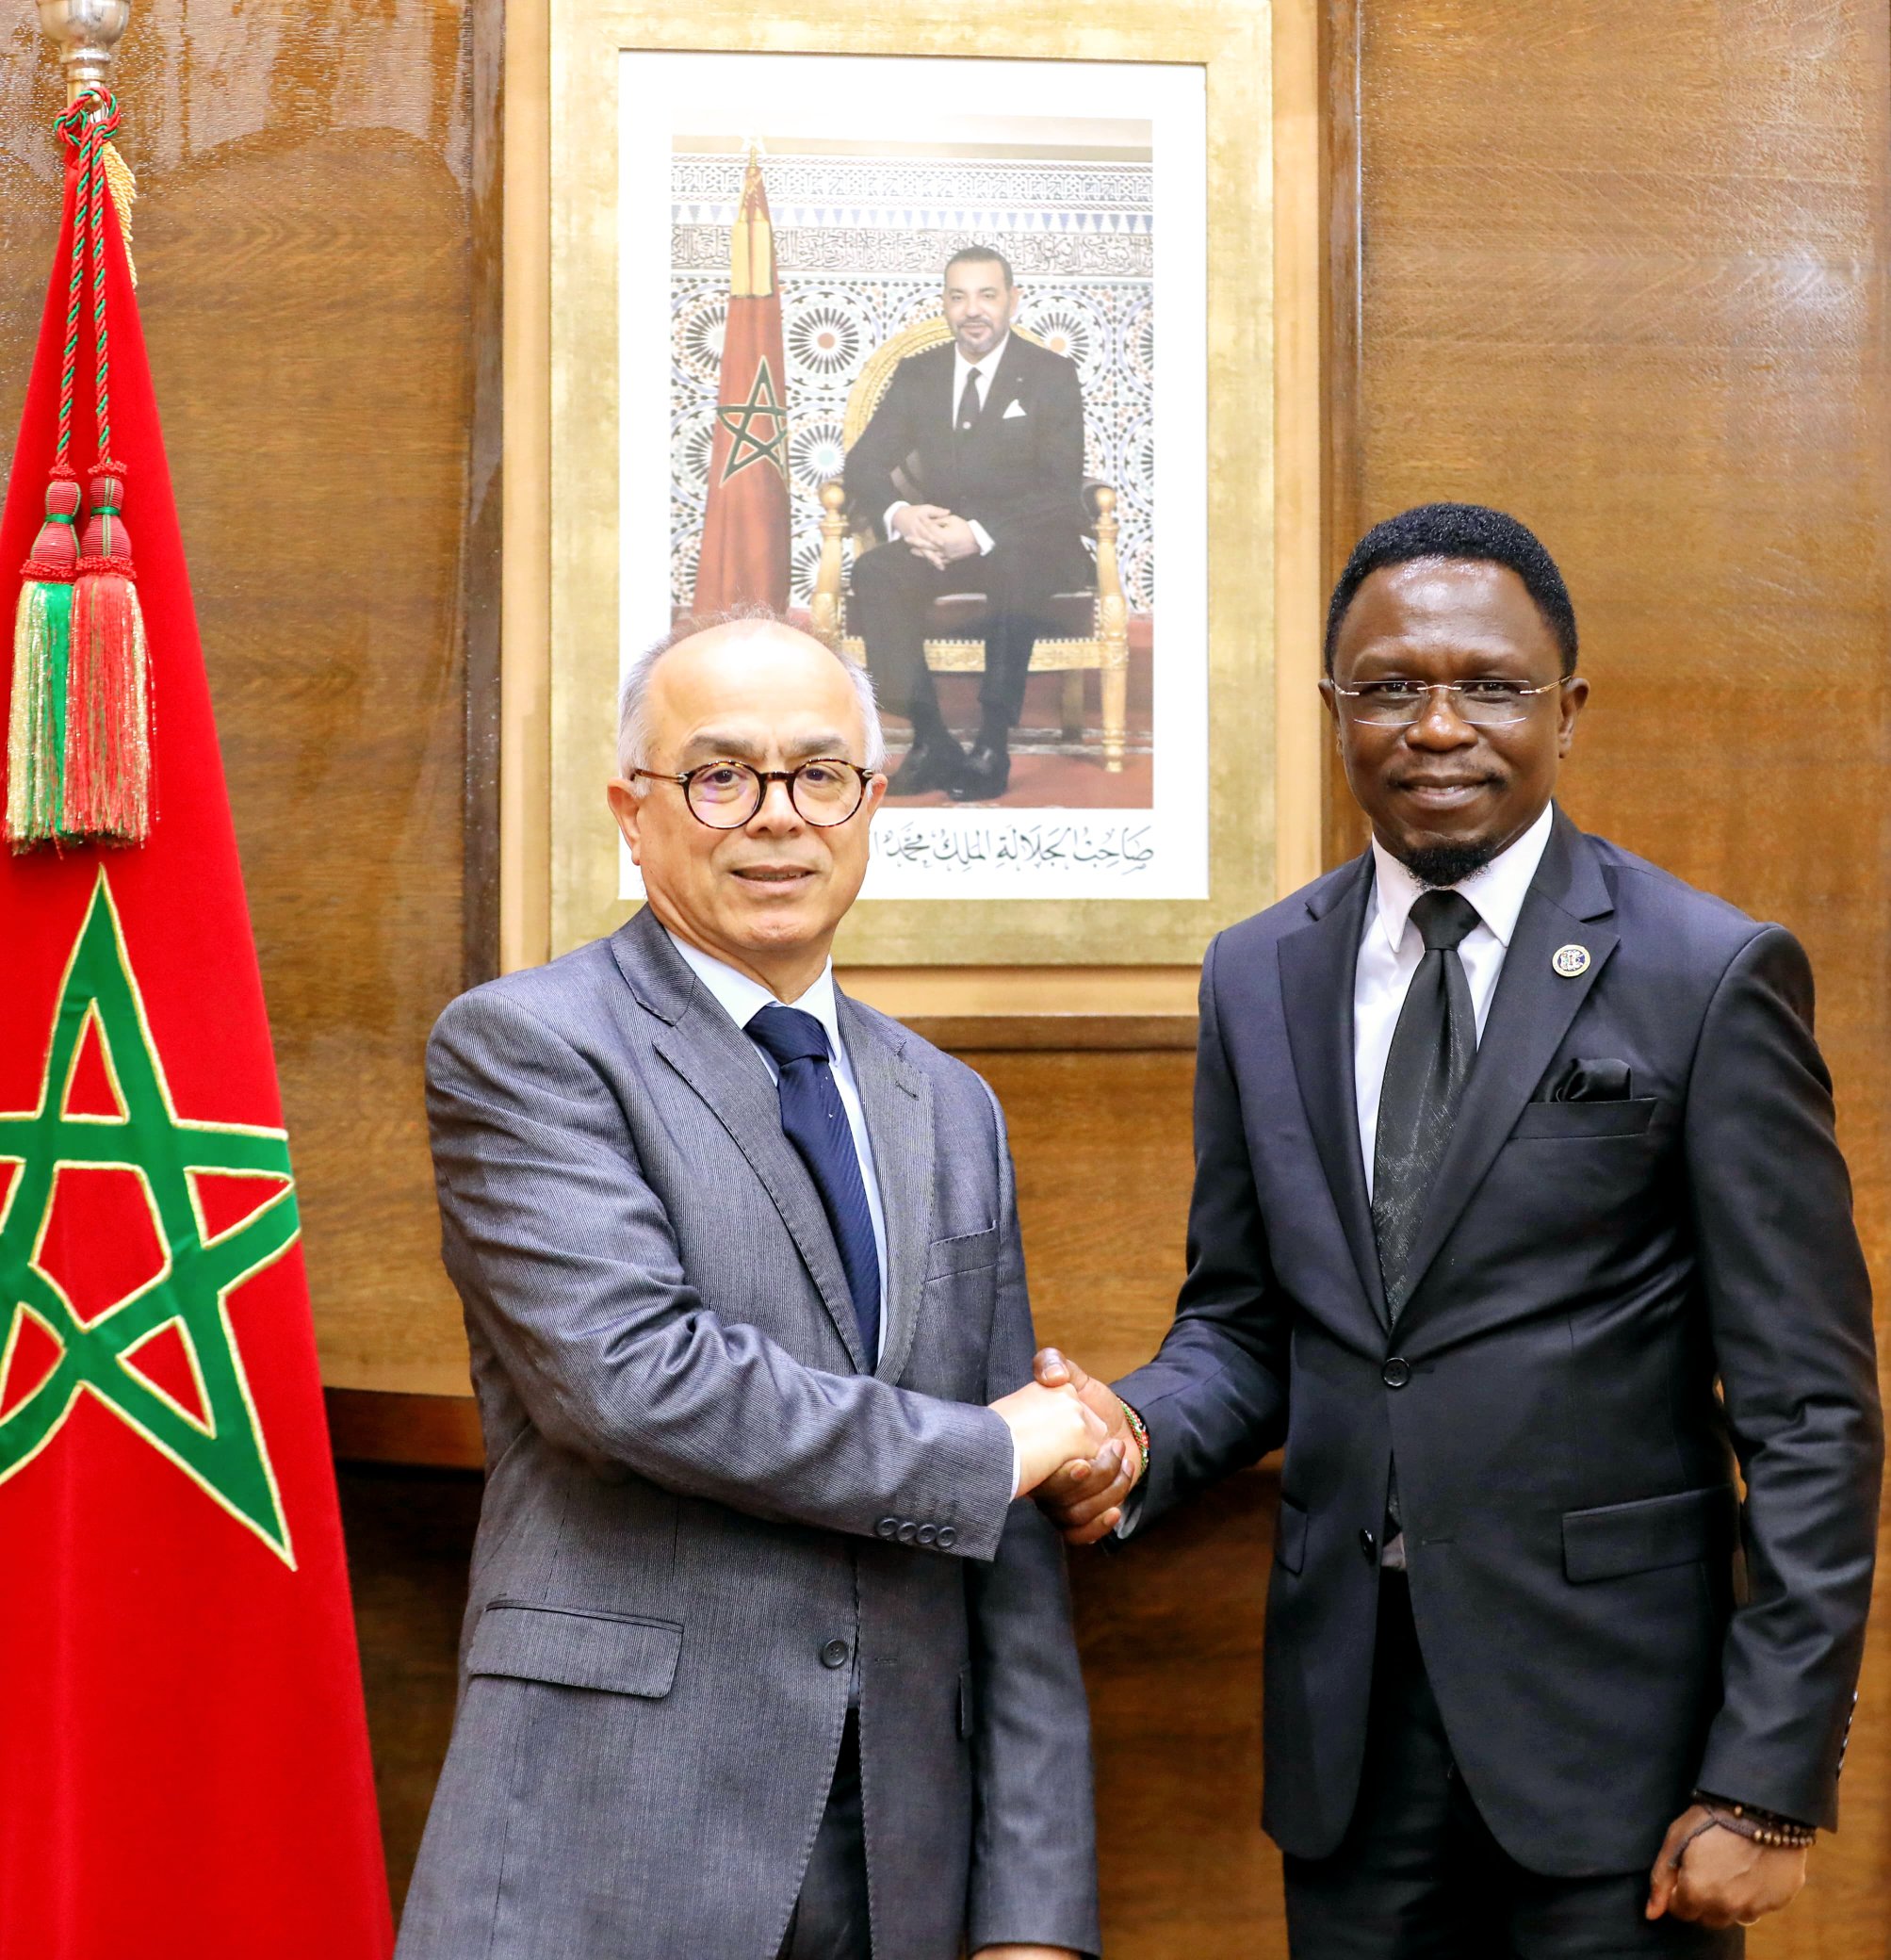 Sports CS Strikes Bilateral Agreement With Morocco’s Sports Ministry on Talent Devt